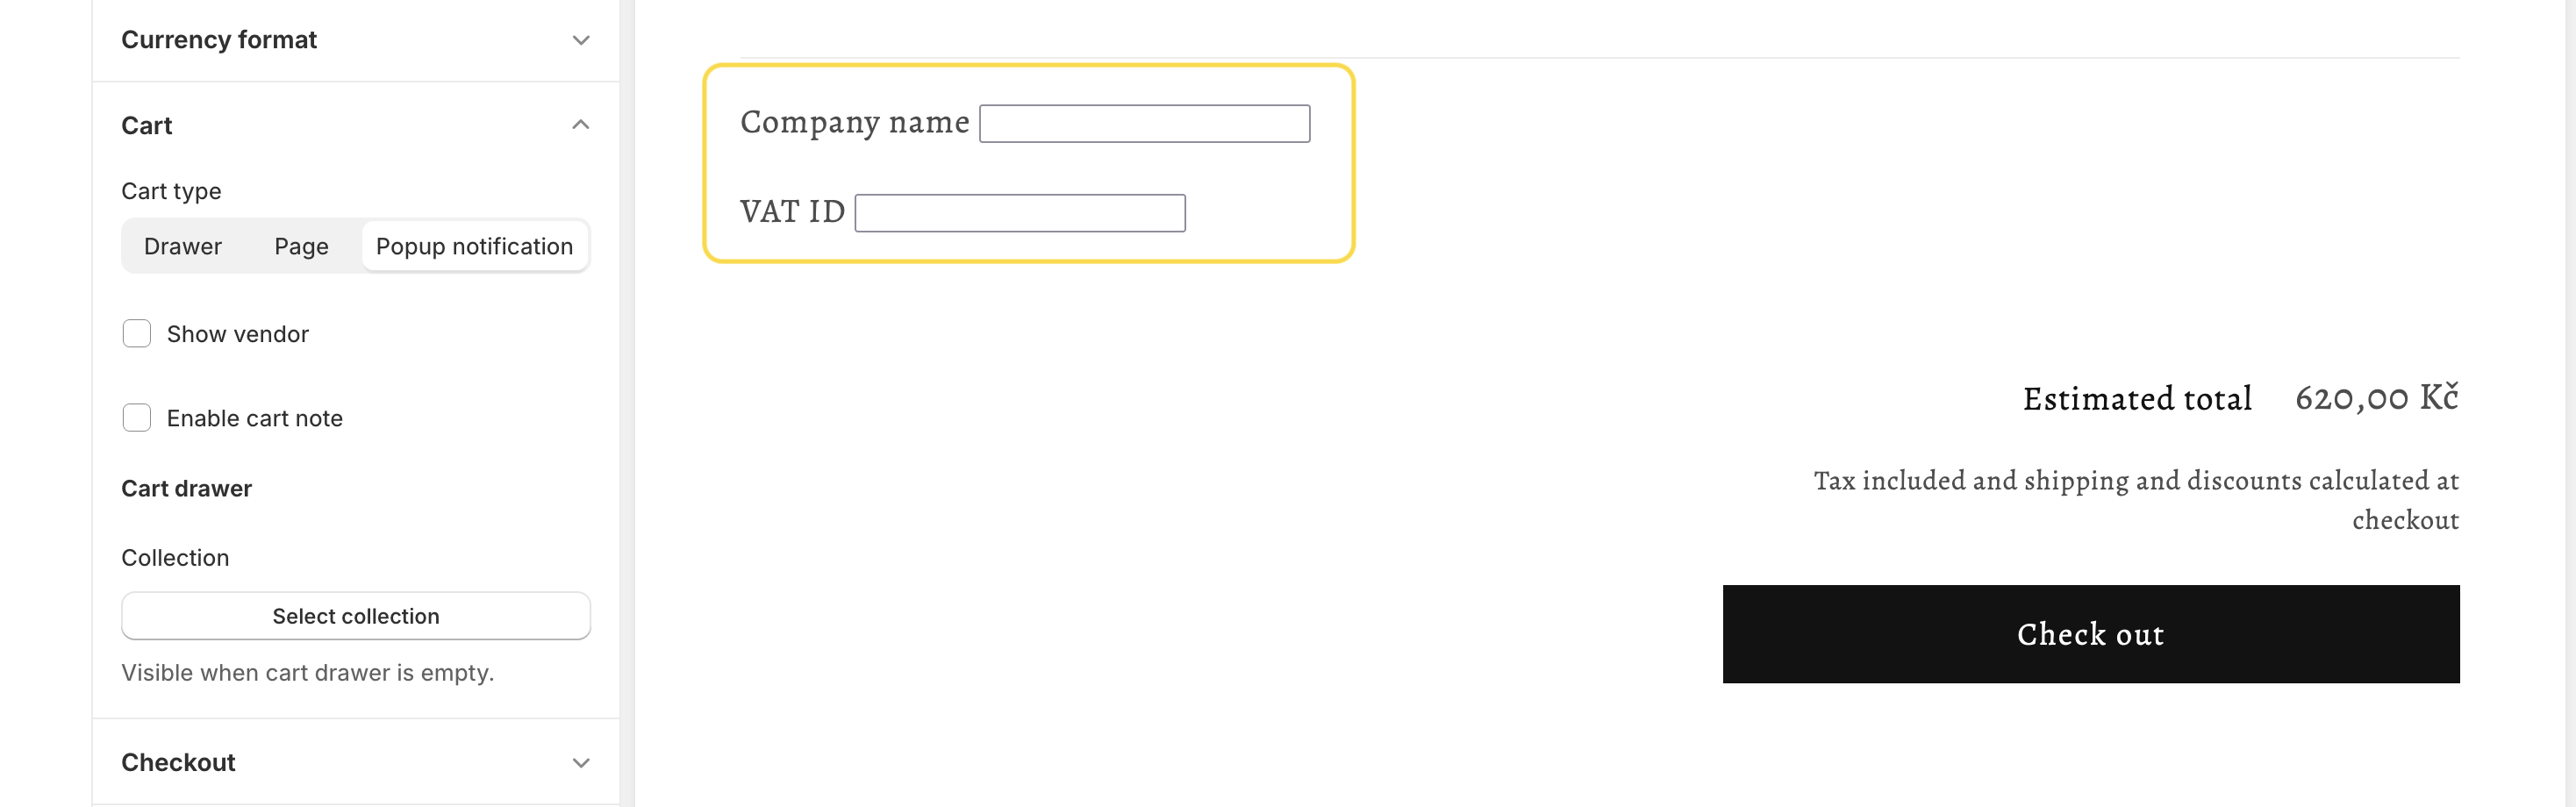 Adding cart attributes for company name and VAT ID